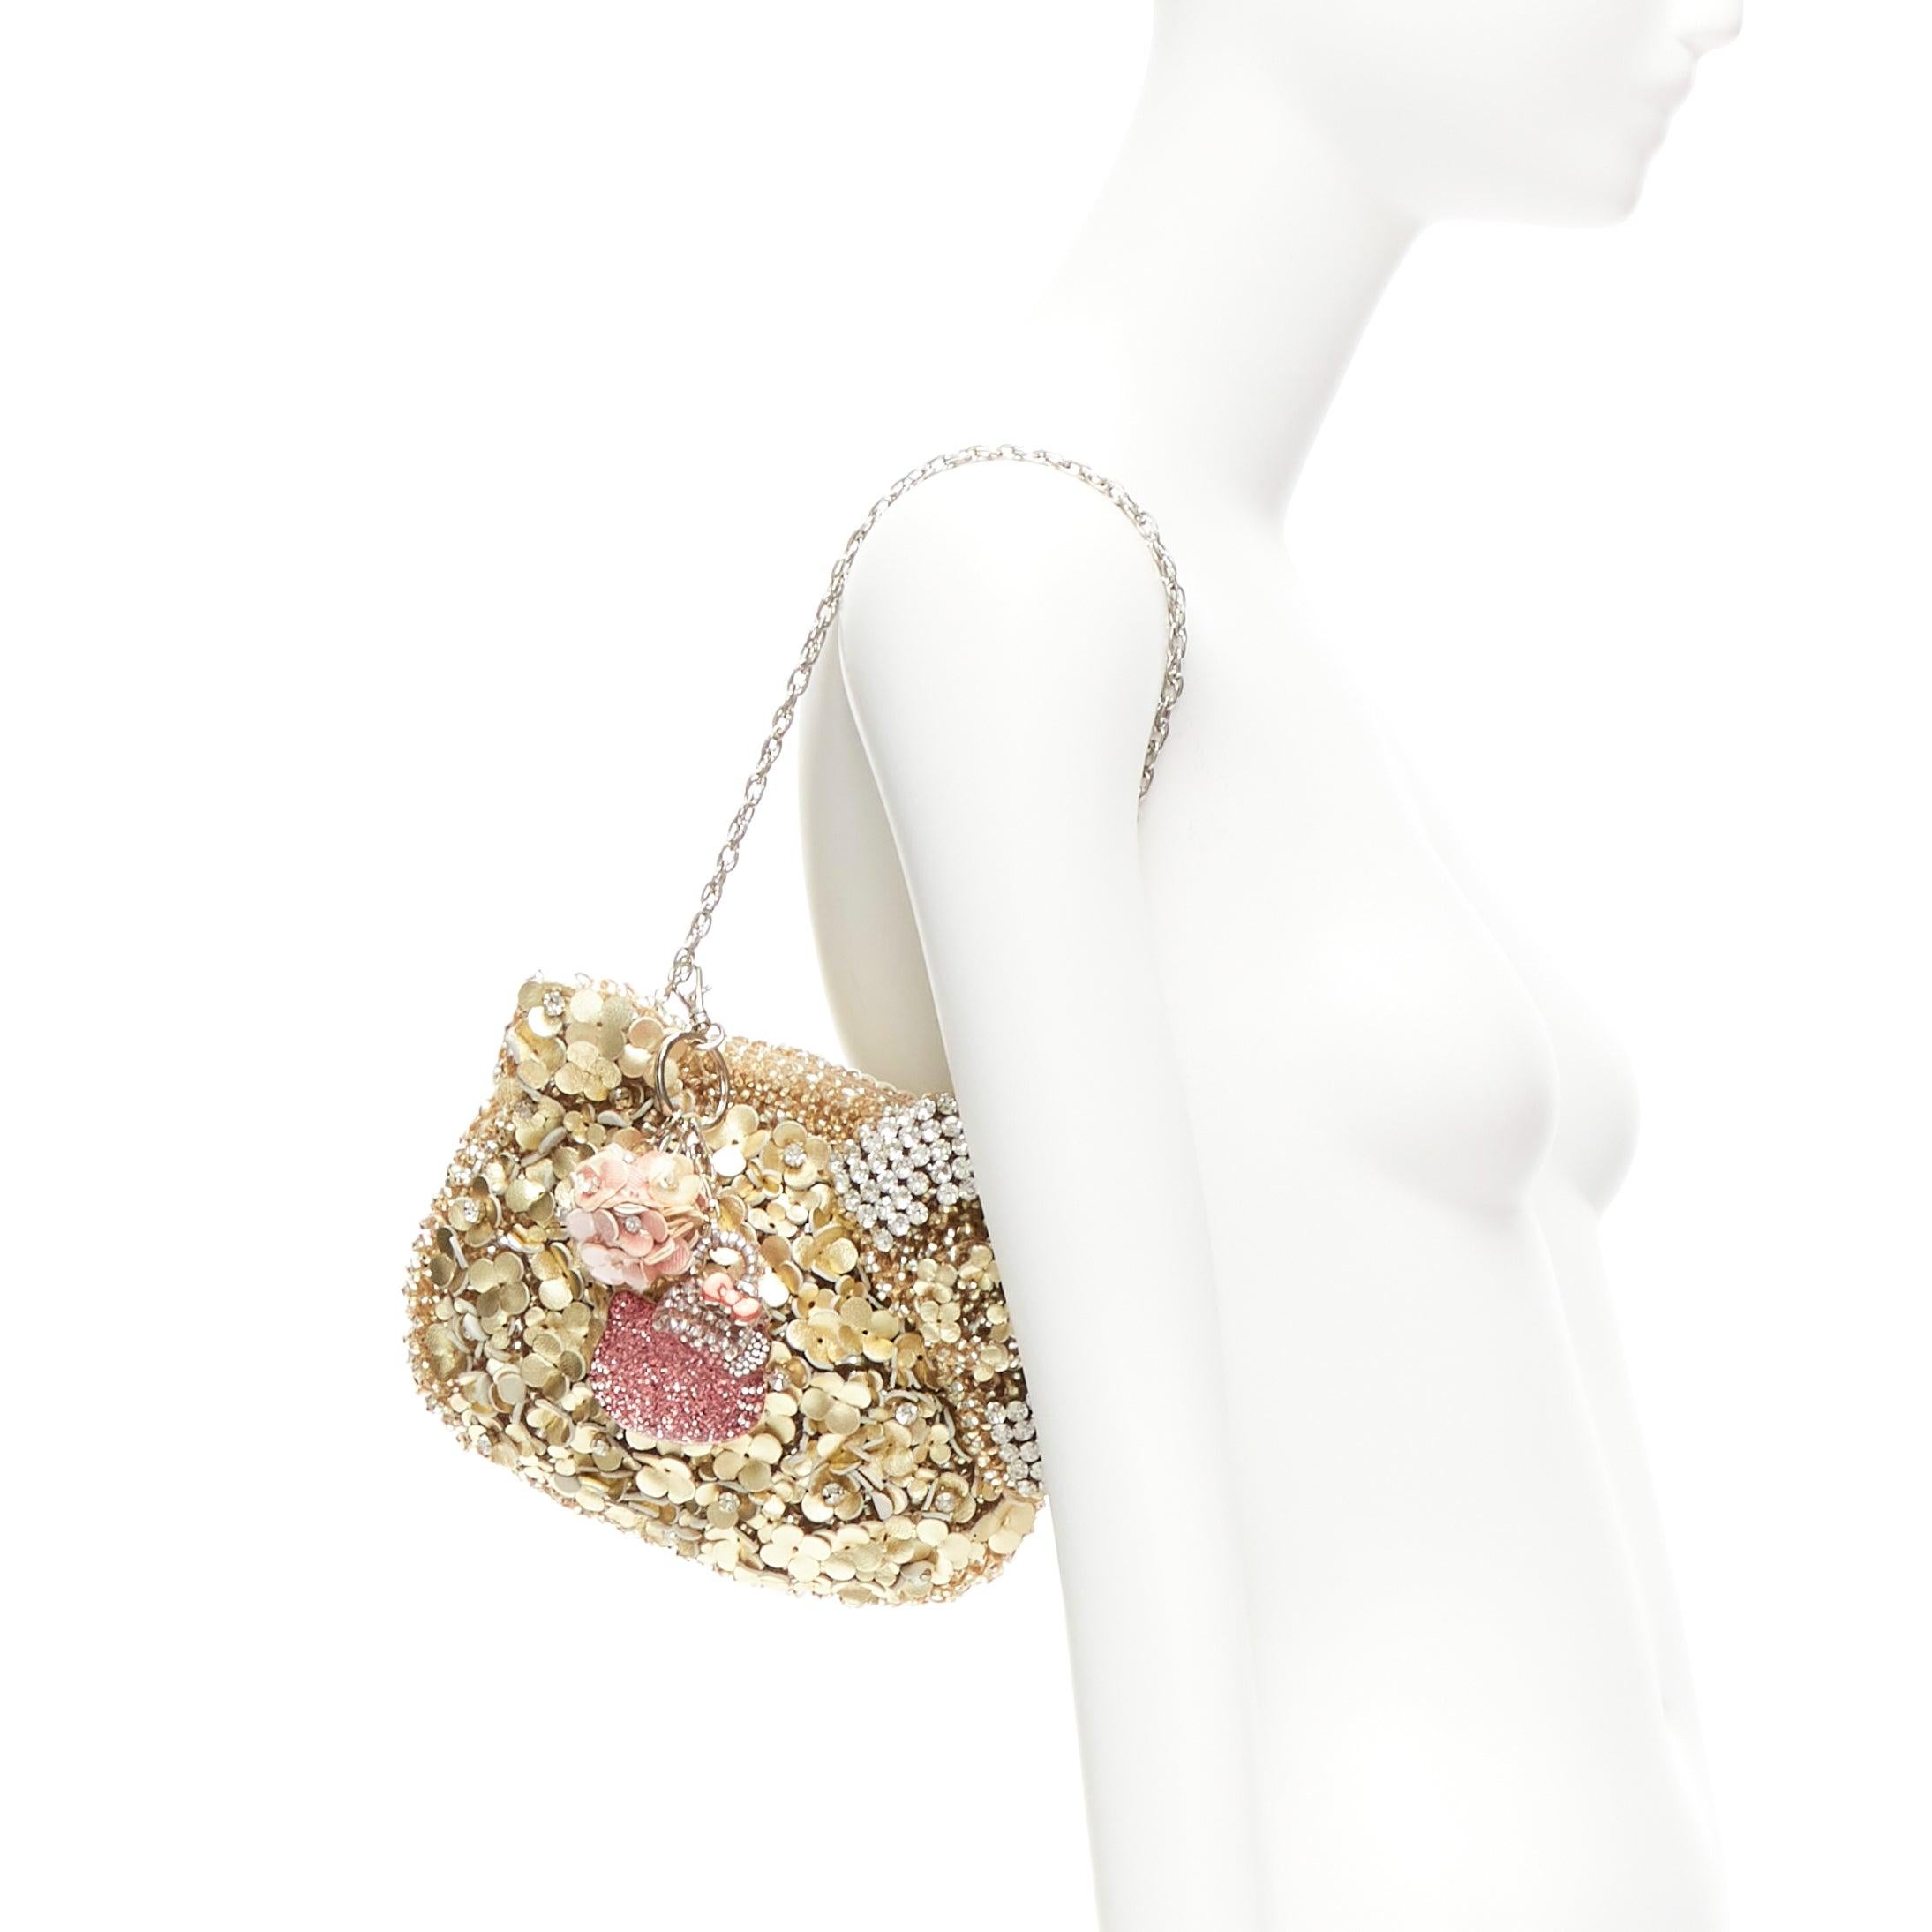 rare ANTEPRIMA HELLO KITTY Wire Bag floral leather sequin pink charms clutch
Reference: ANWU/A01066
Brand: Anteprima
Collection: Wire Bag
Material: Plastic
Color: Gold, Pink
Pattern: Solid
Closure: Zip
Extra Details: Pink glitter resin Hello Kitty